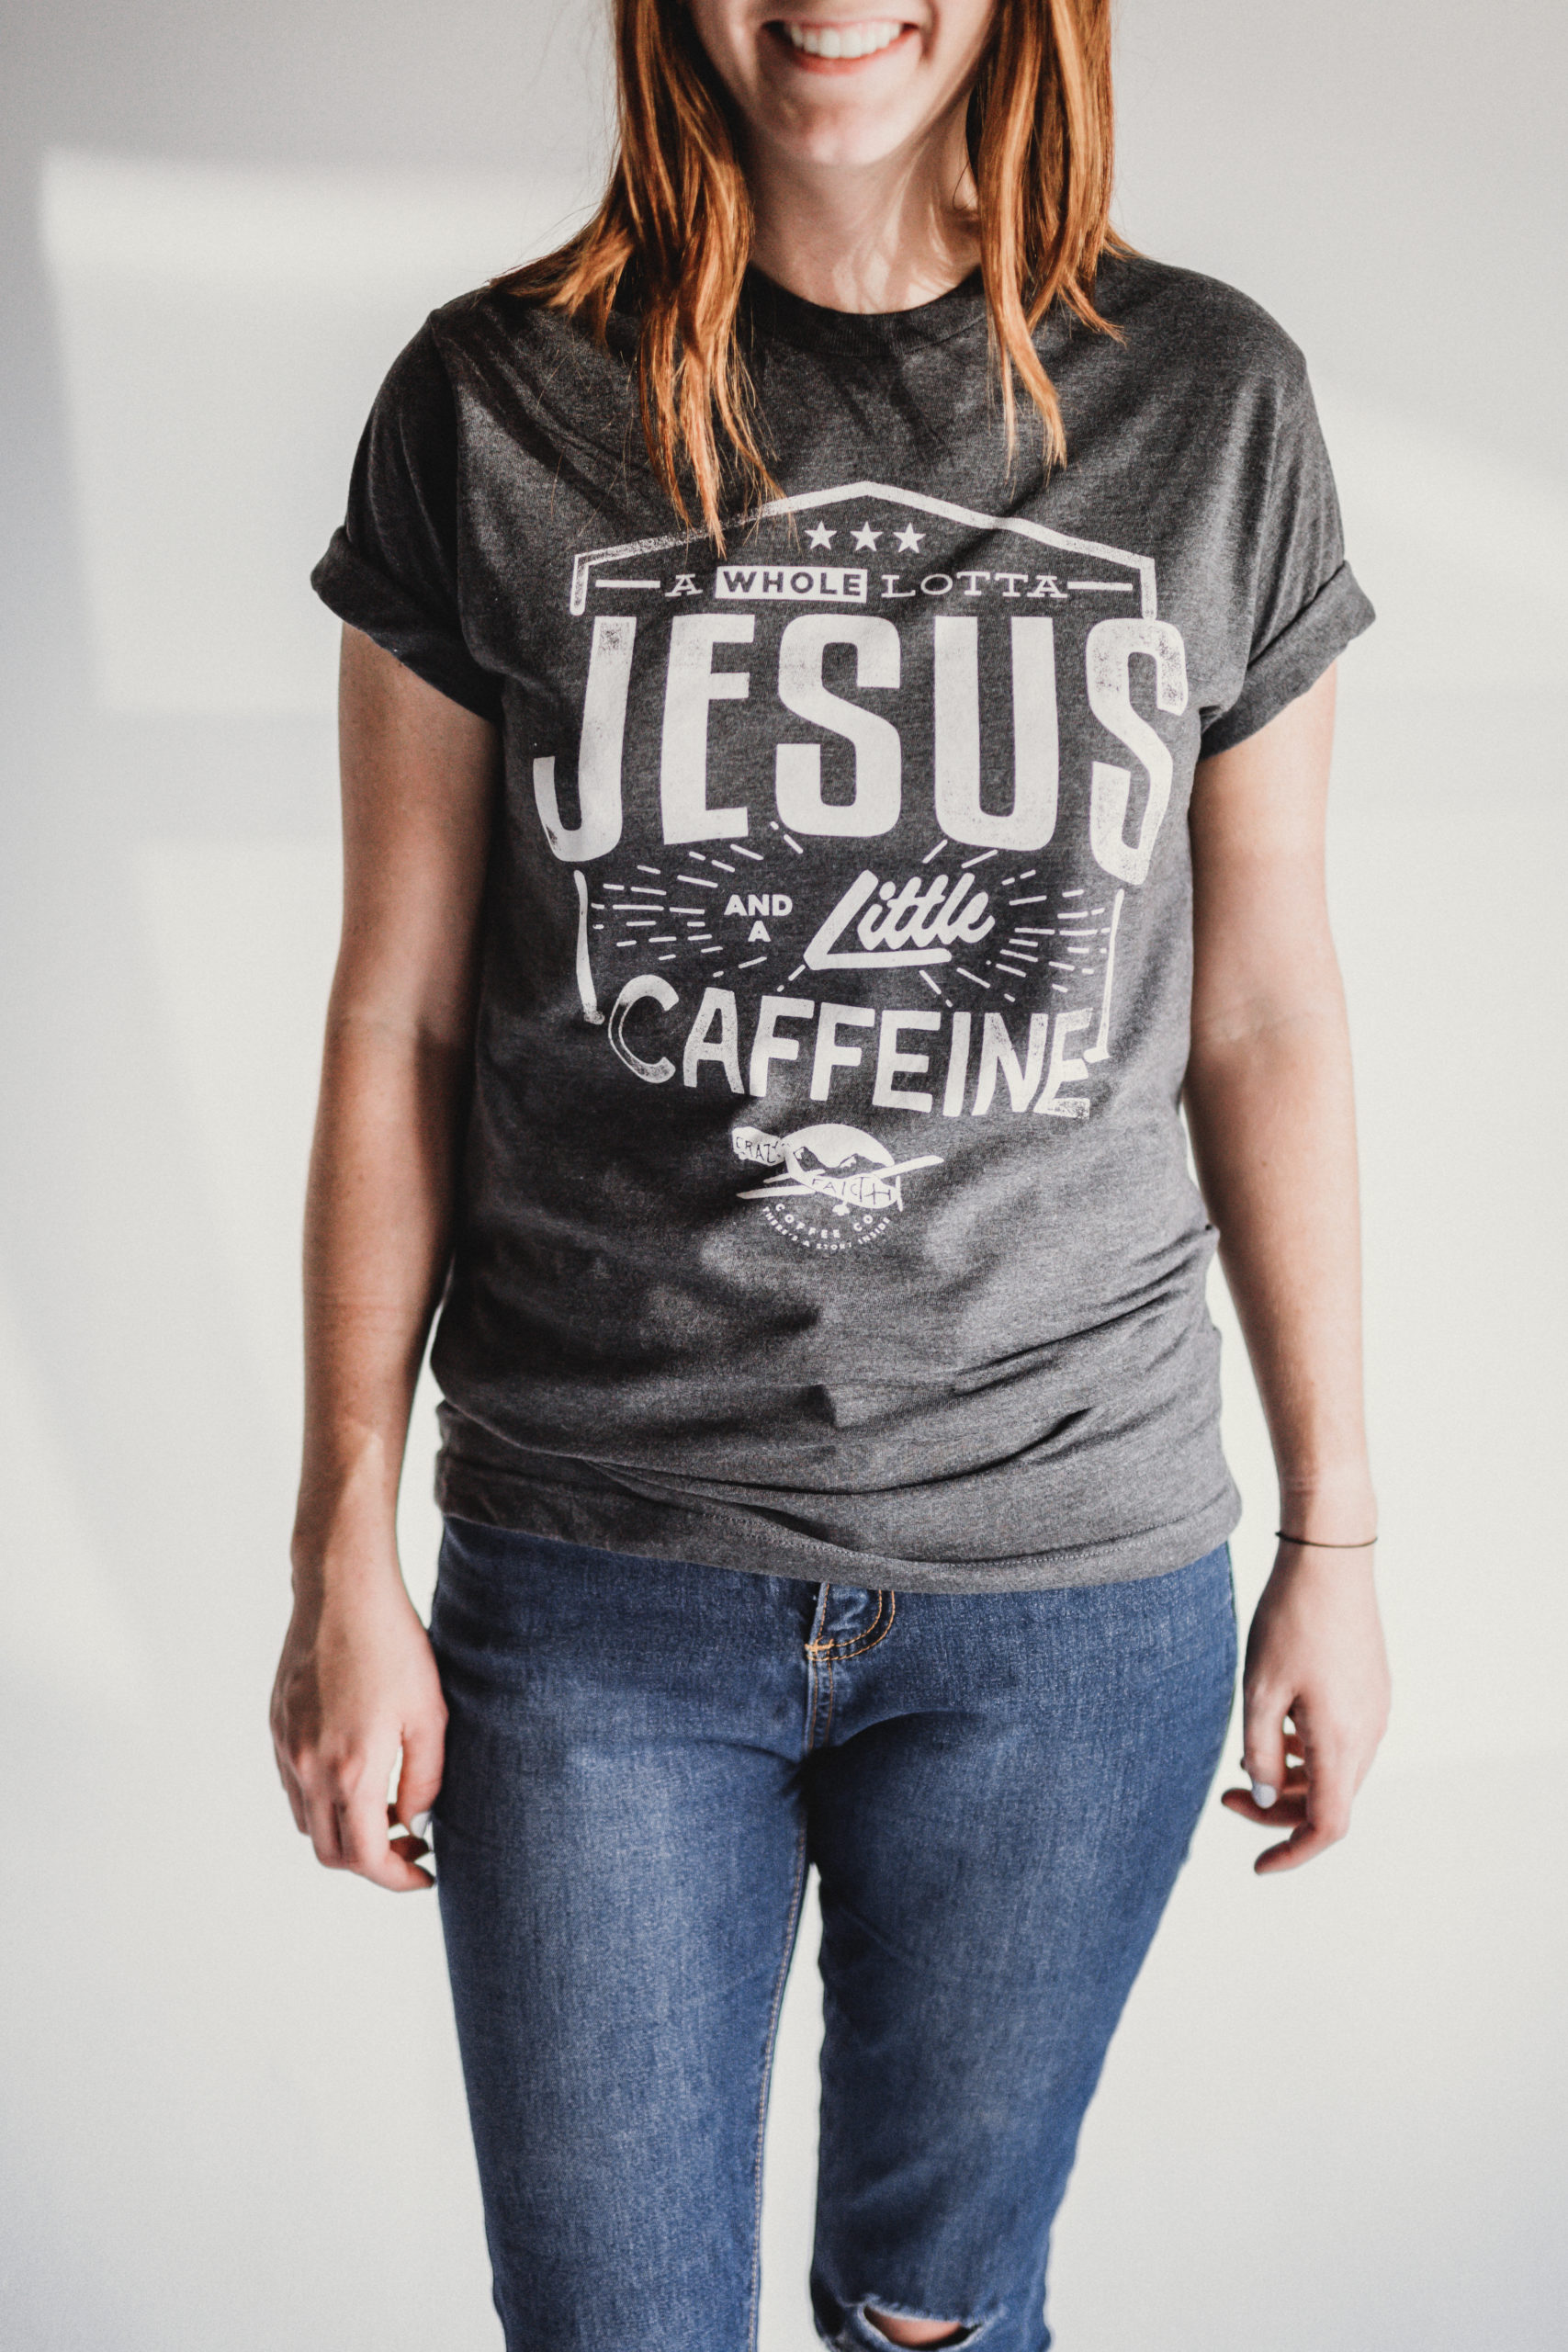 JSM Woman wearing a gray t shirt that says A Whole Lotta Jesus and a Little Caffeine from Crazy Faith